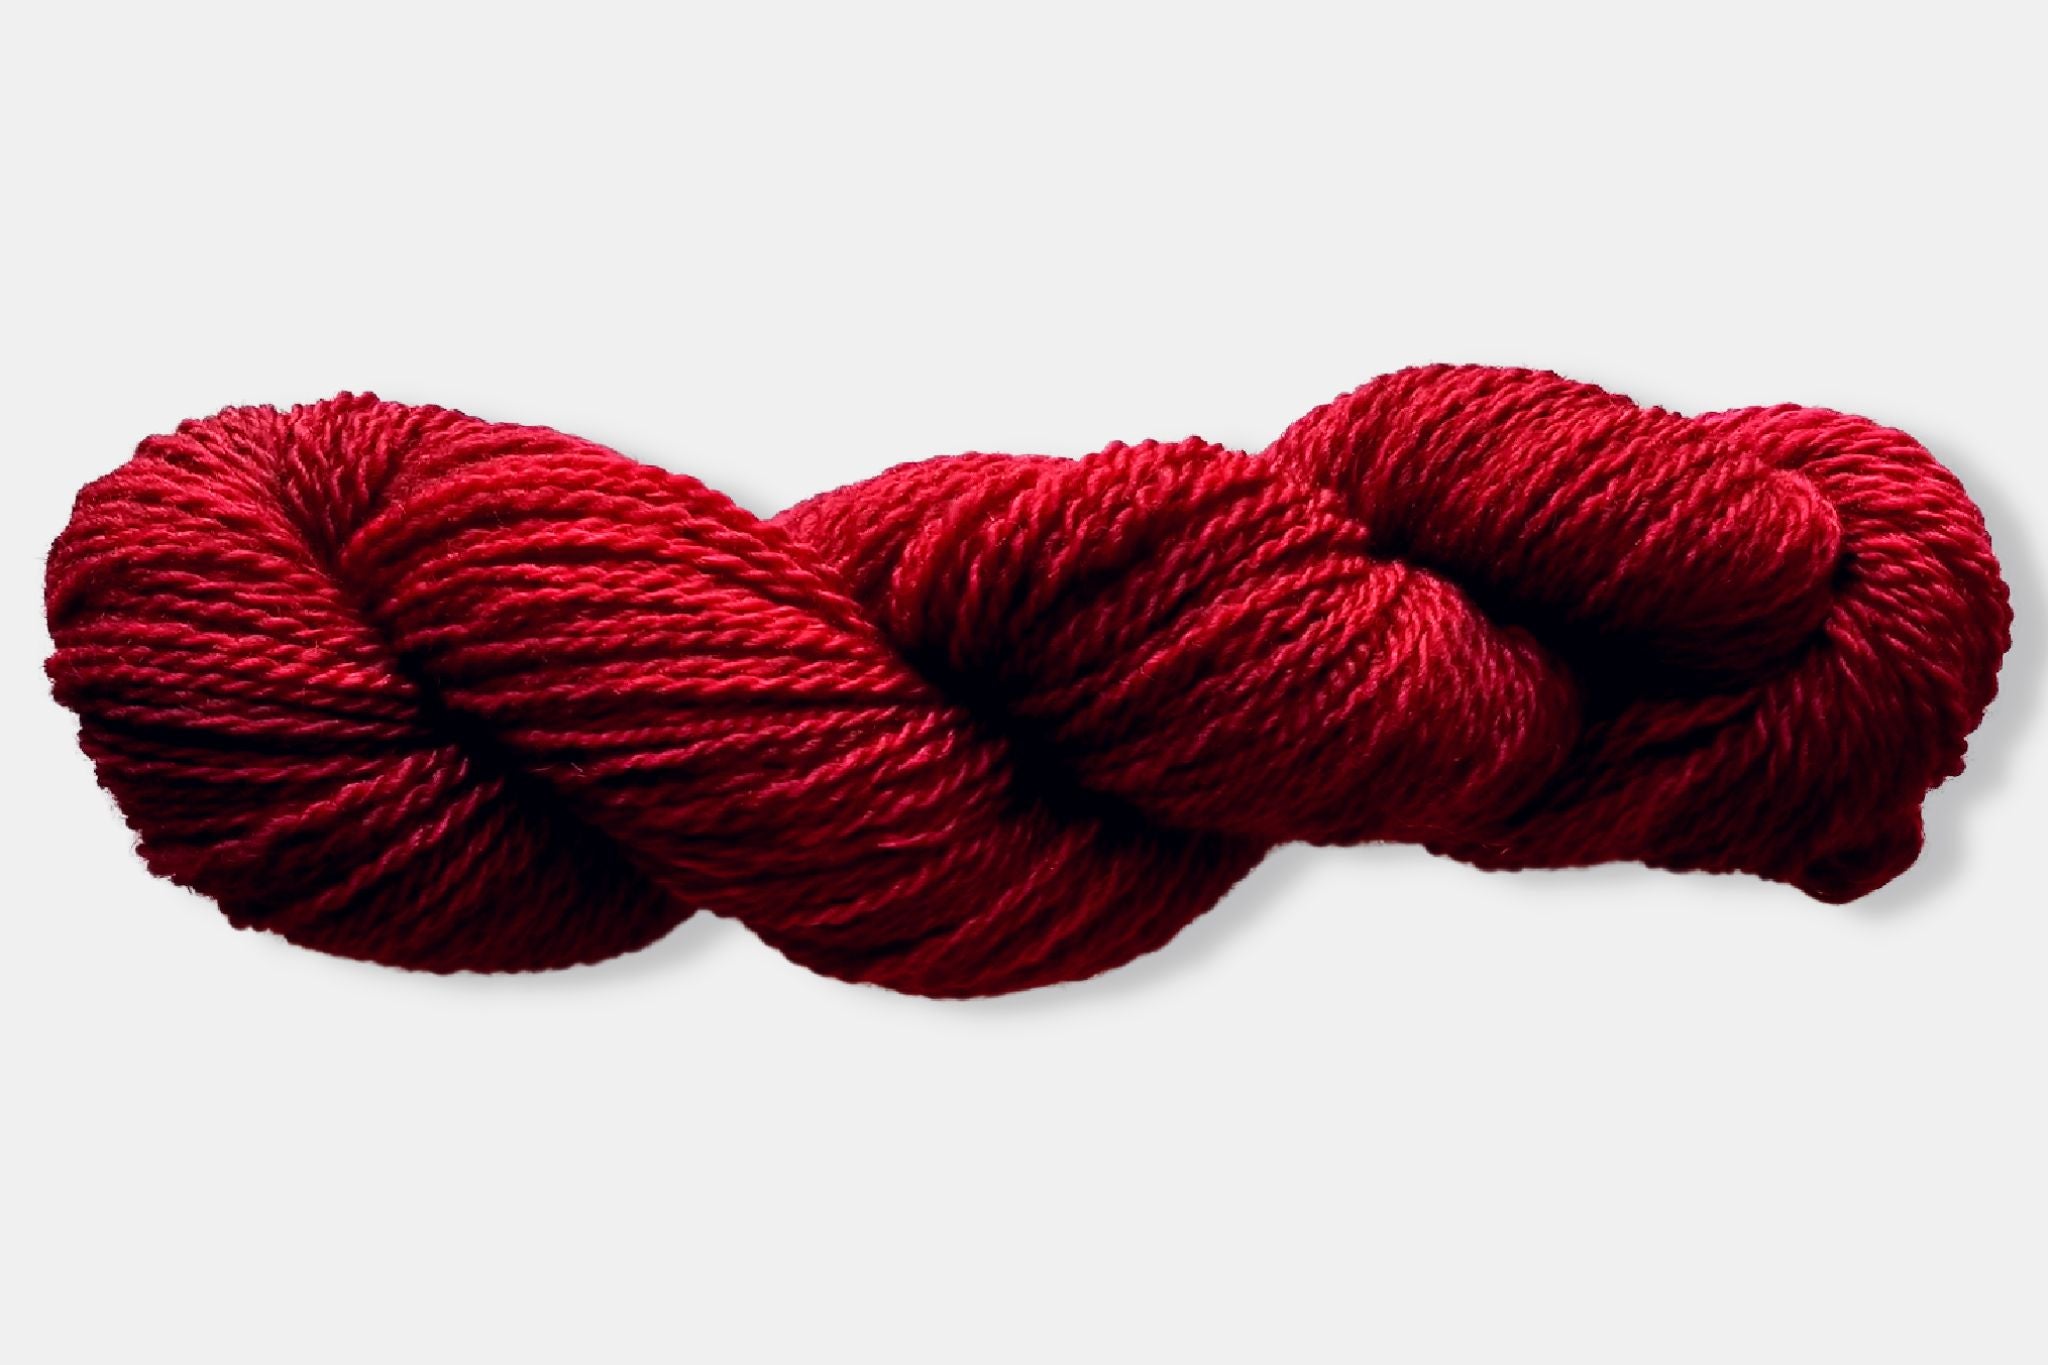 Fleece and Harmony Selkirk Worsted in Cranberry